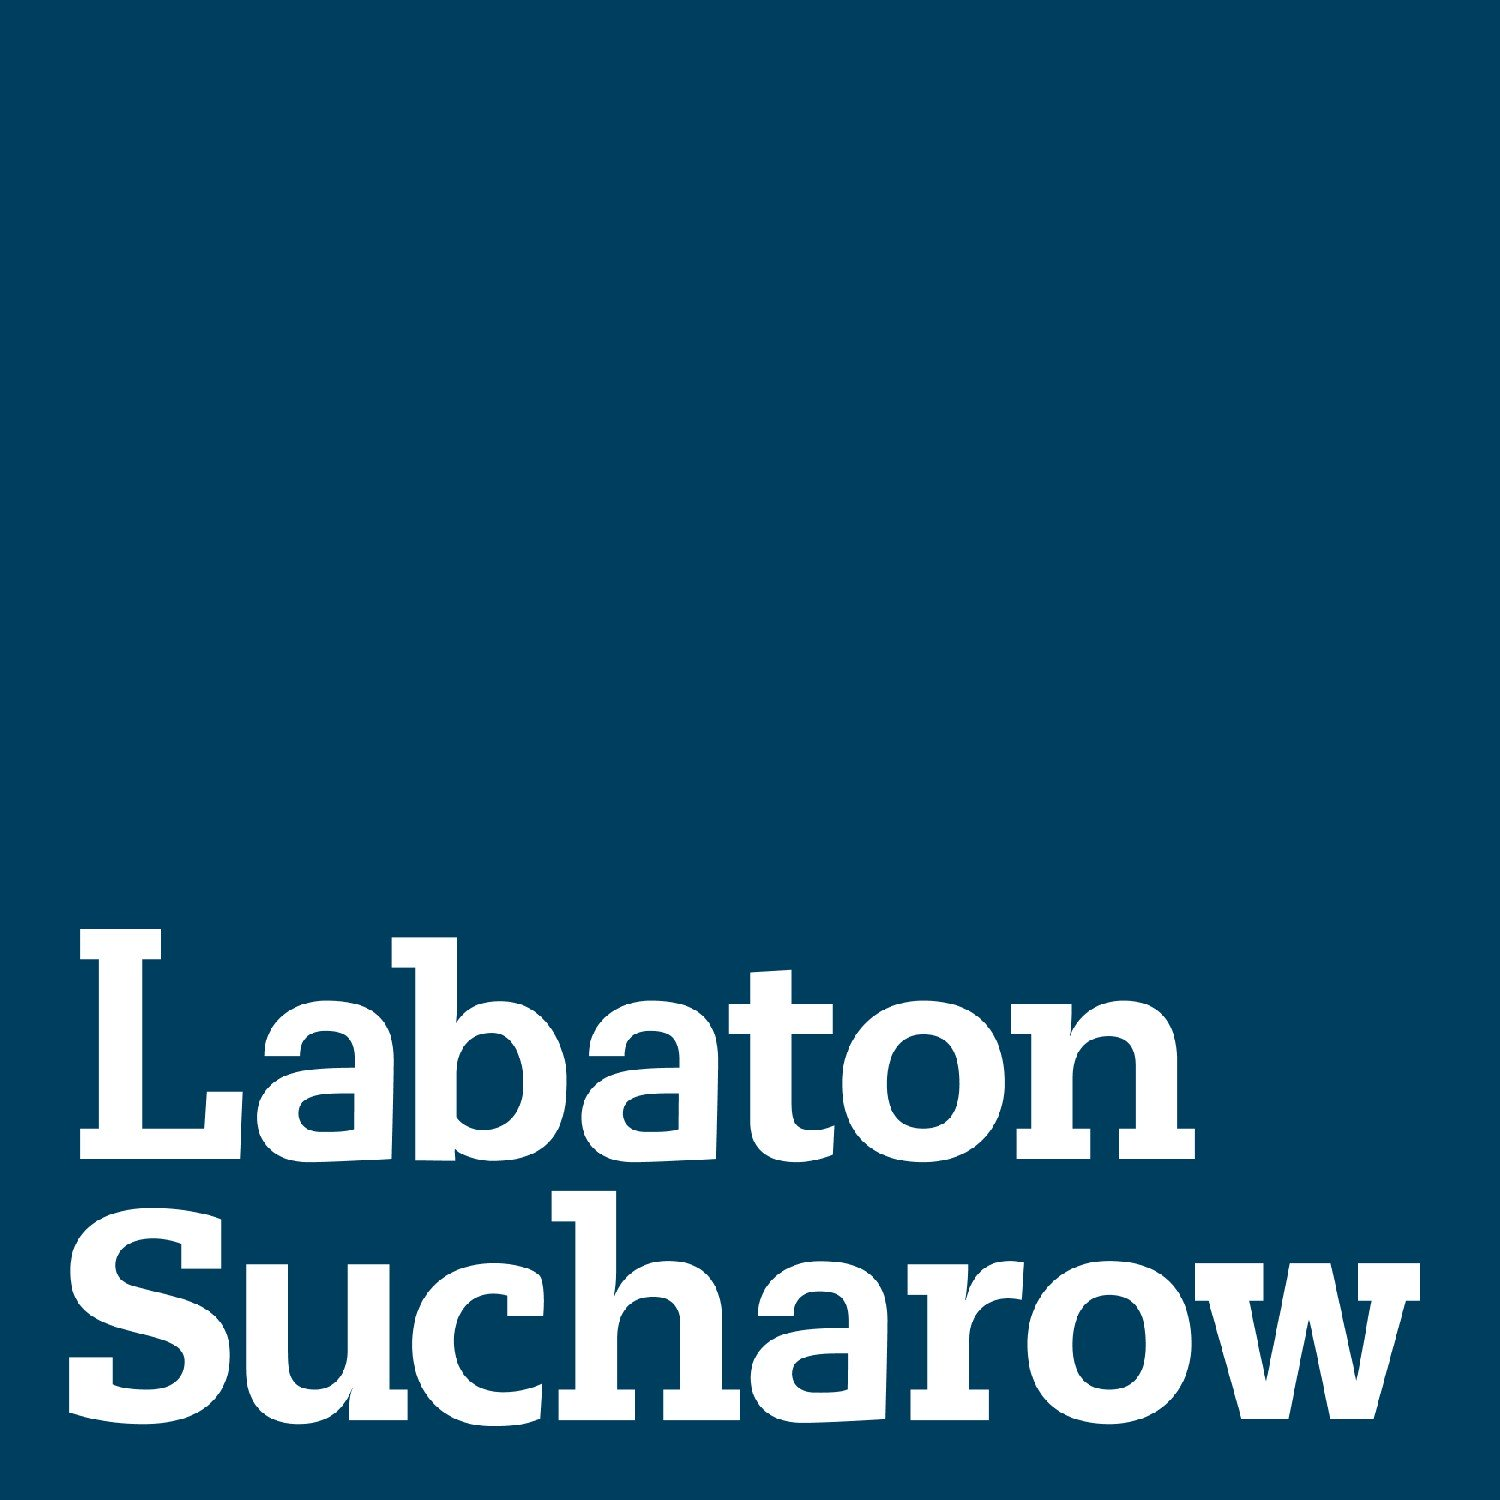 Labaton Sucharow LLP, Wednesday, May 6, 2020, Press release picture